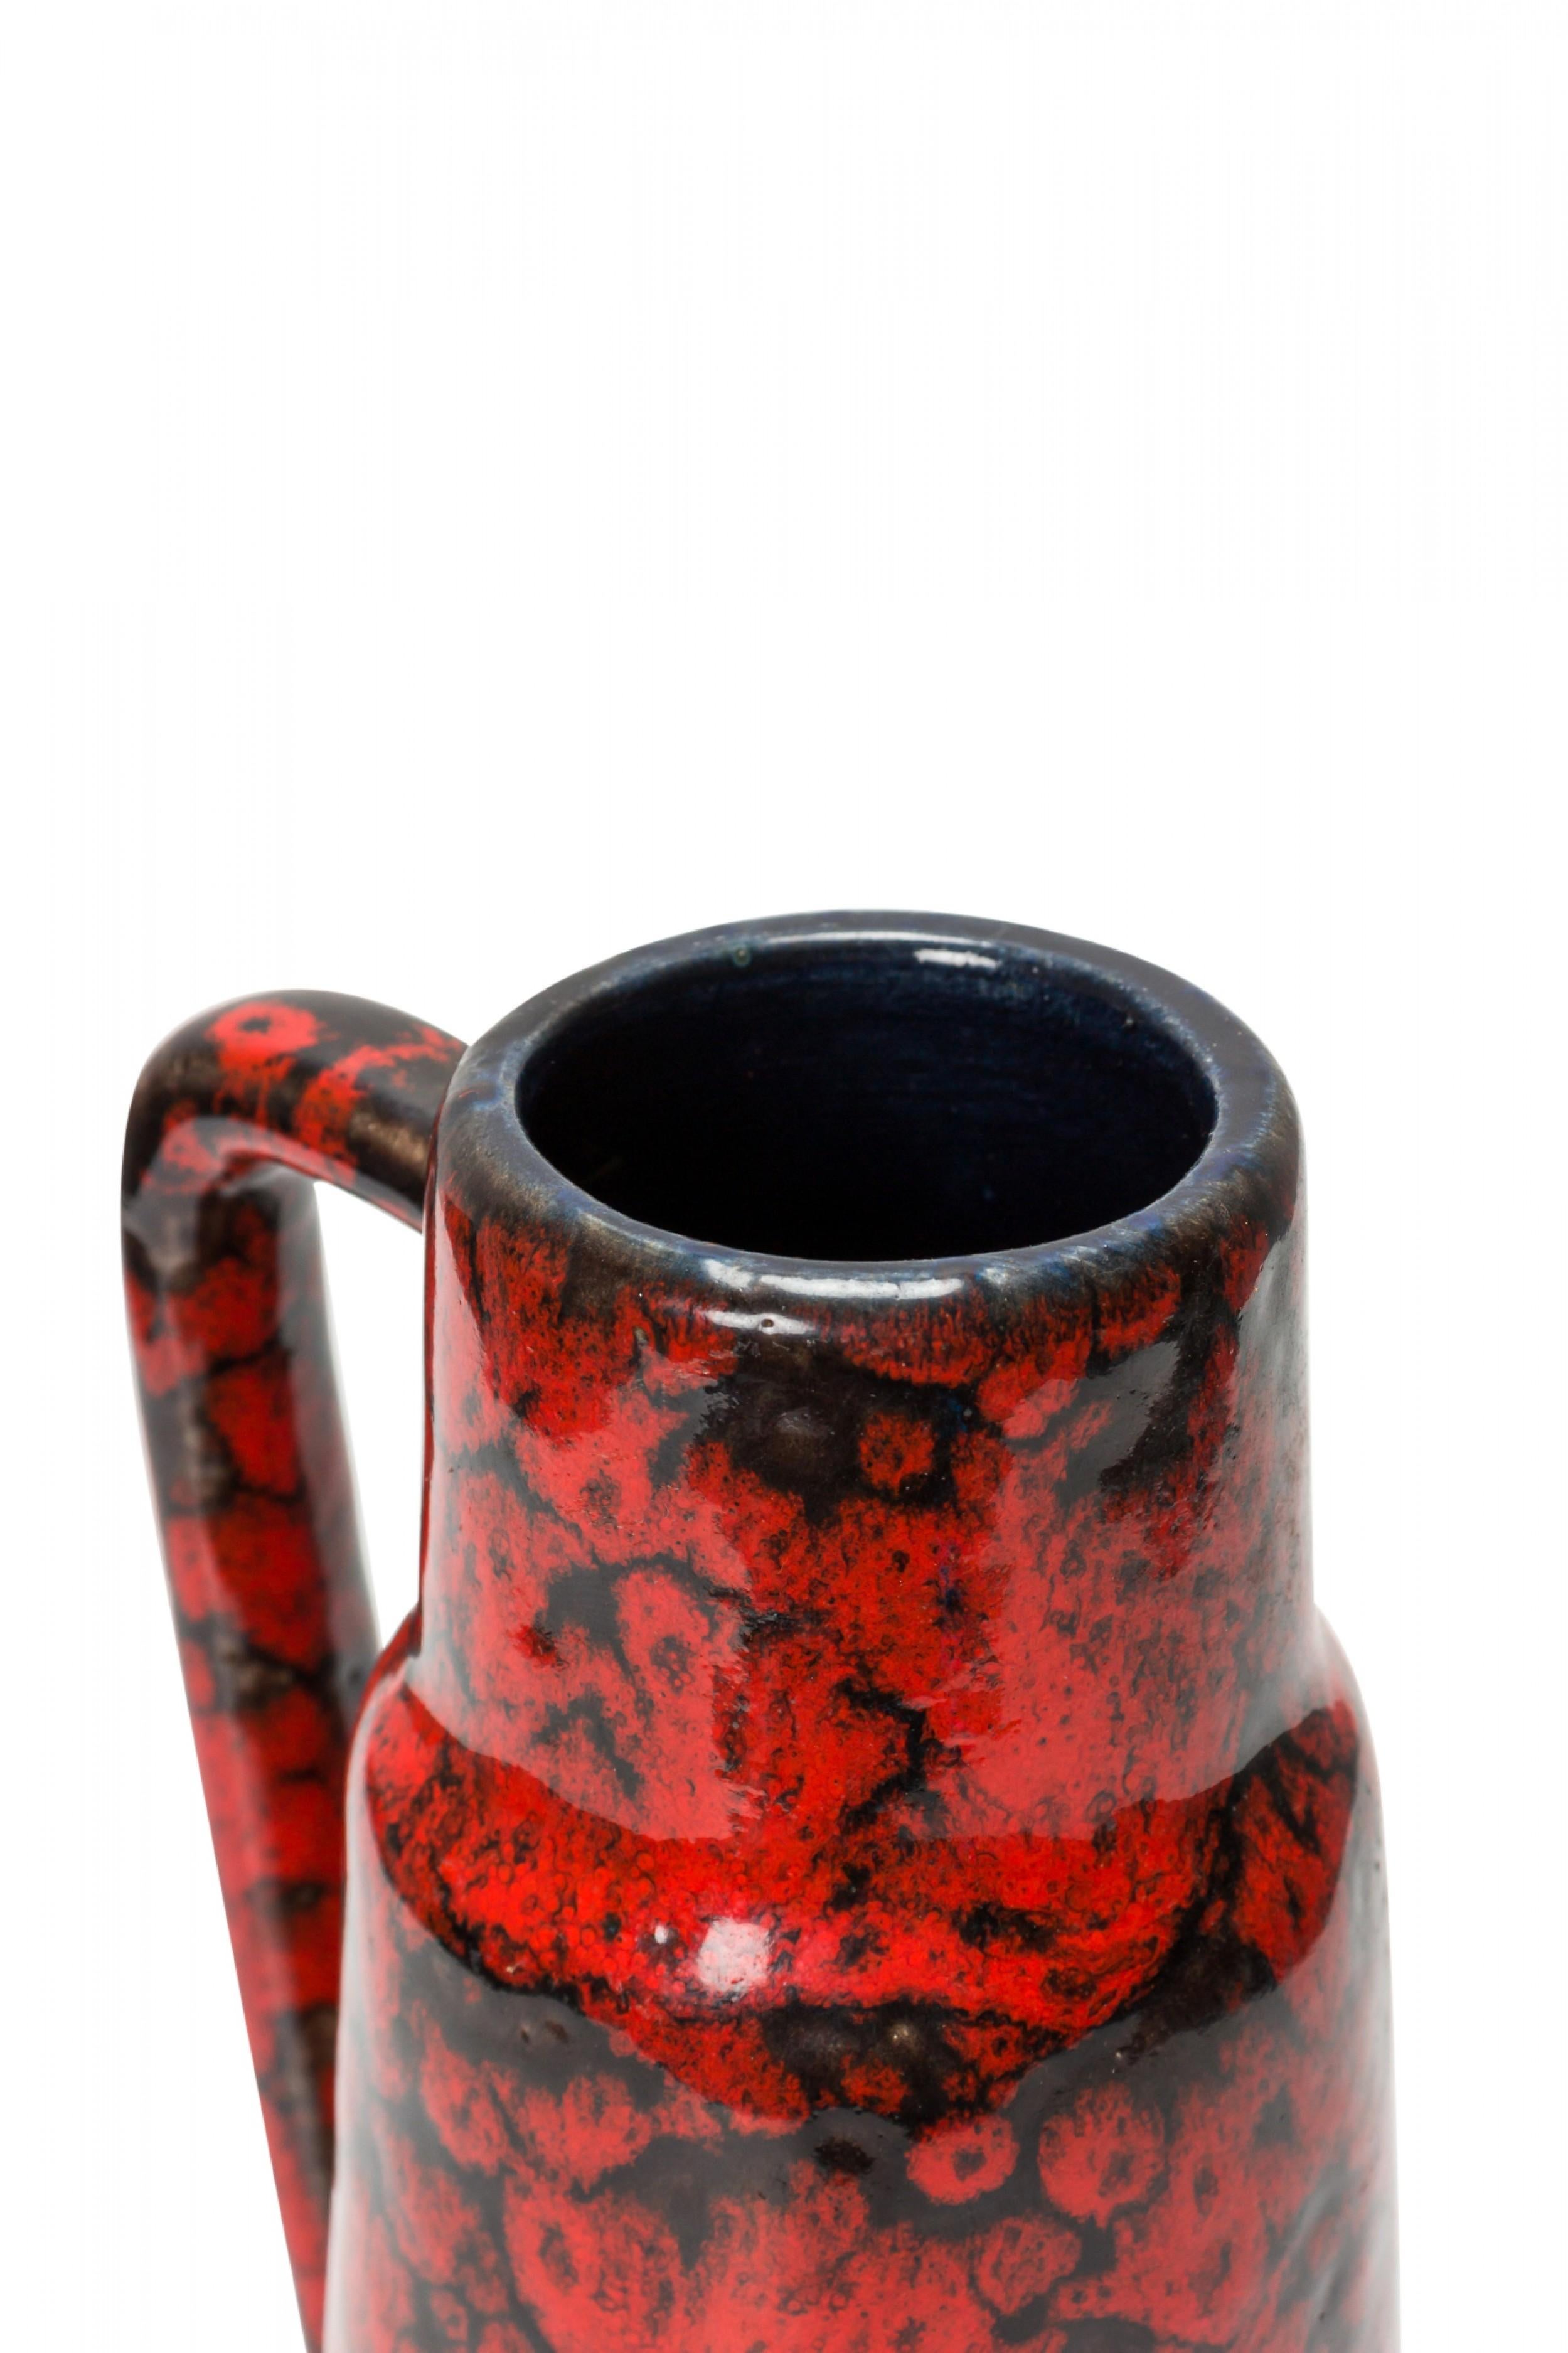 West German Mid-Century ceramic pitcher with a fat lava-style red and black glaze. (SCHEURICH KERAMIK, mark on bottom, W. GERMANY 275-20).